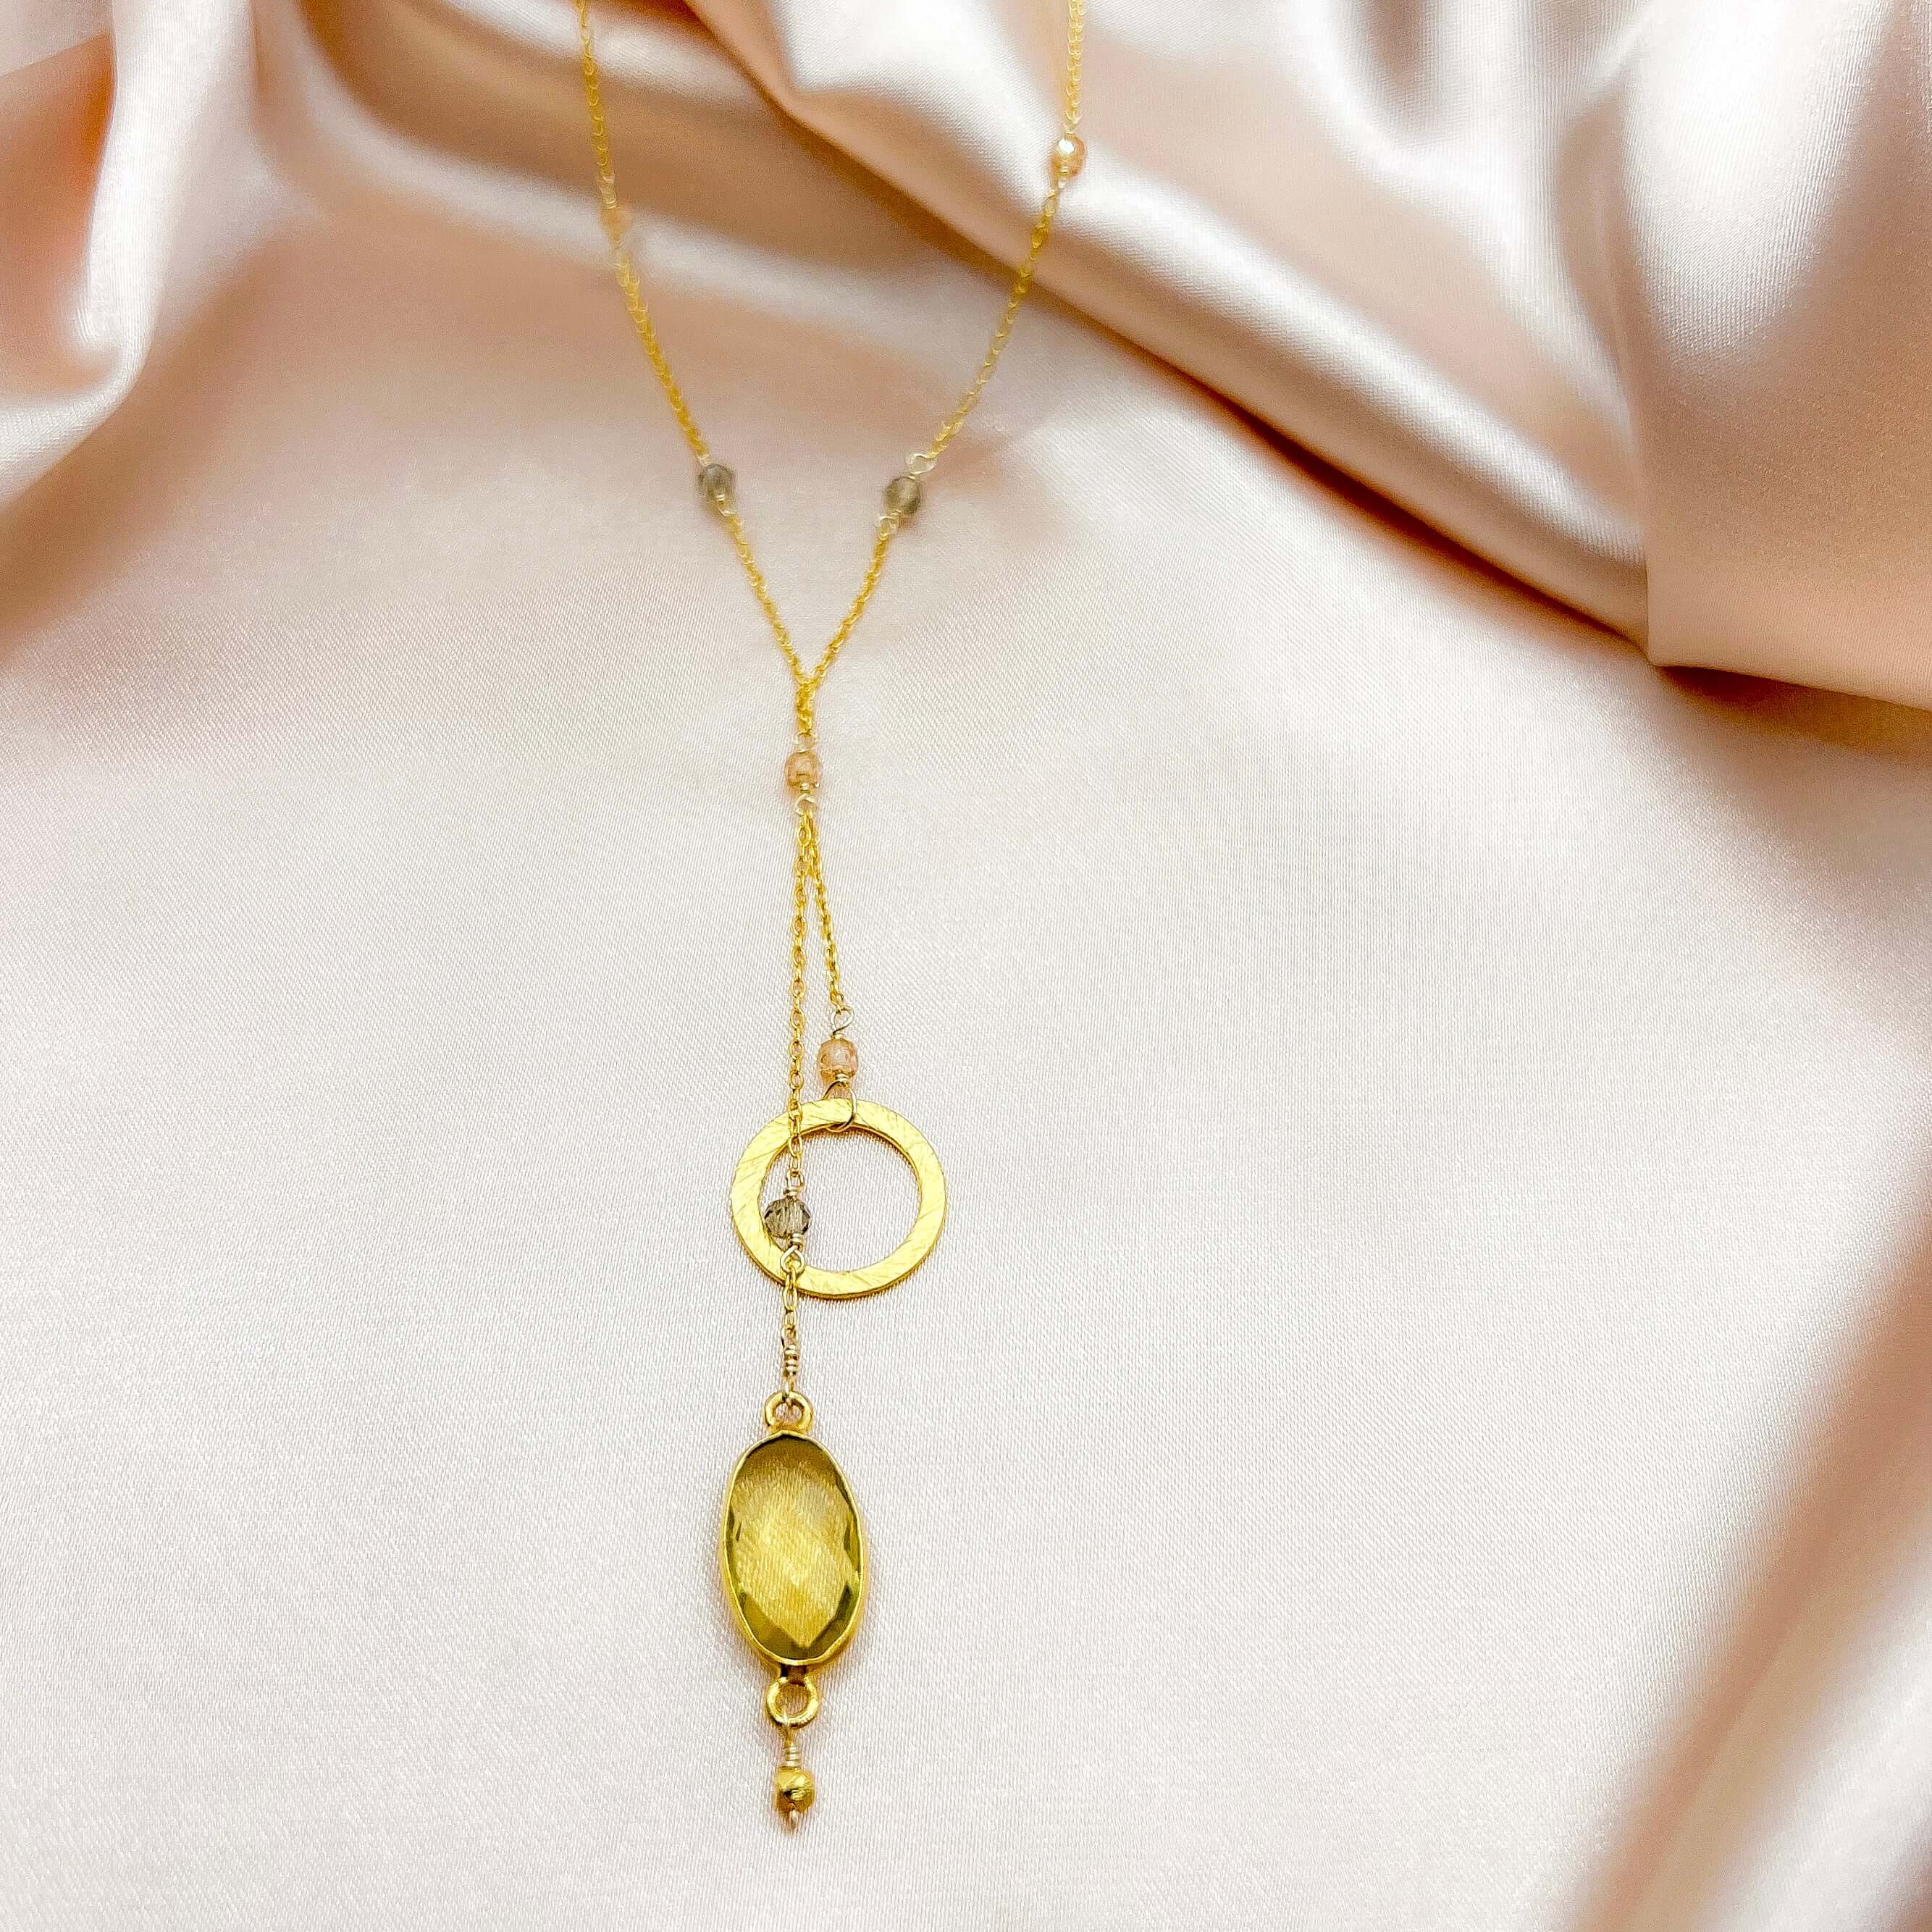 Ballet Necklace with Citrine Gemstone and Elegant Circle Accent